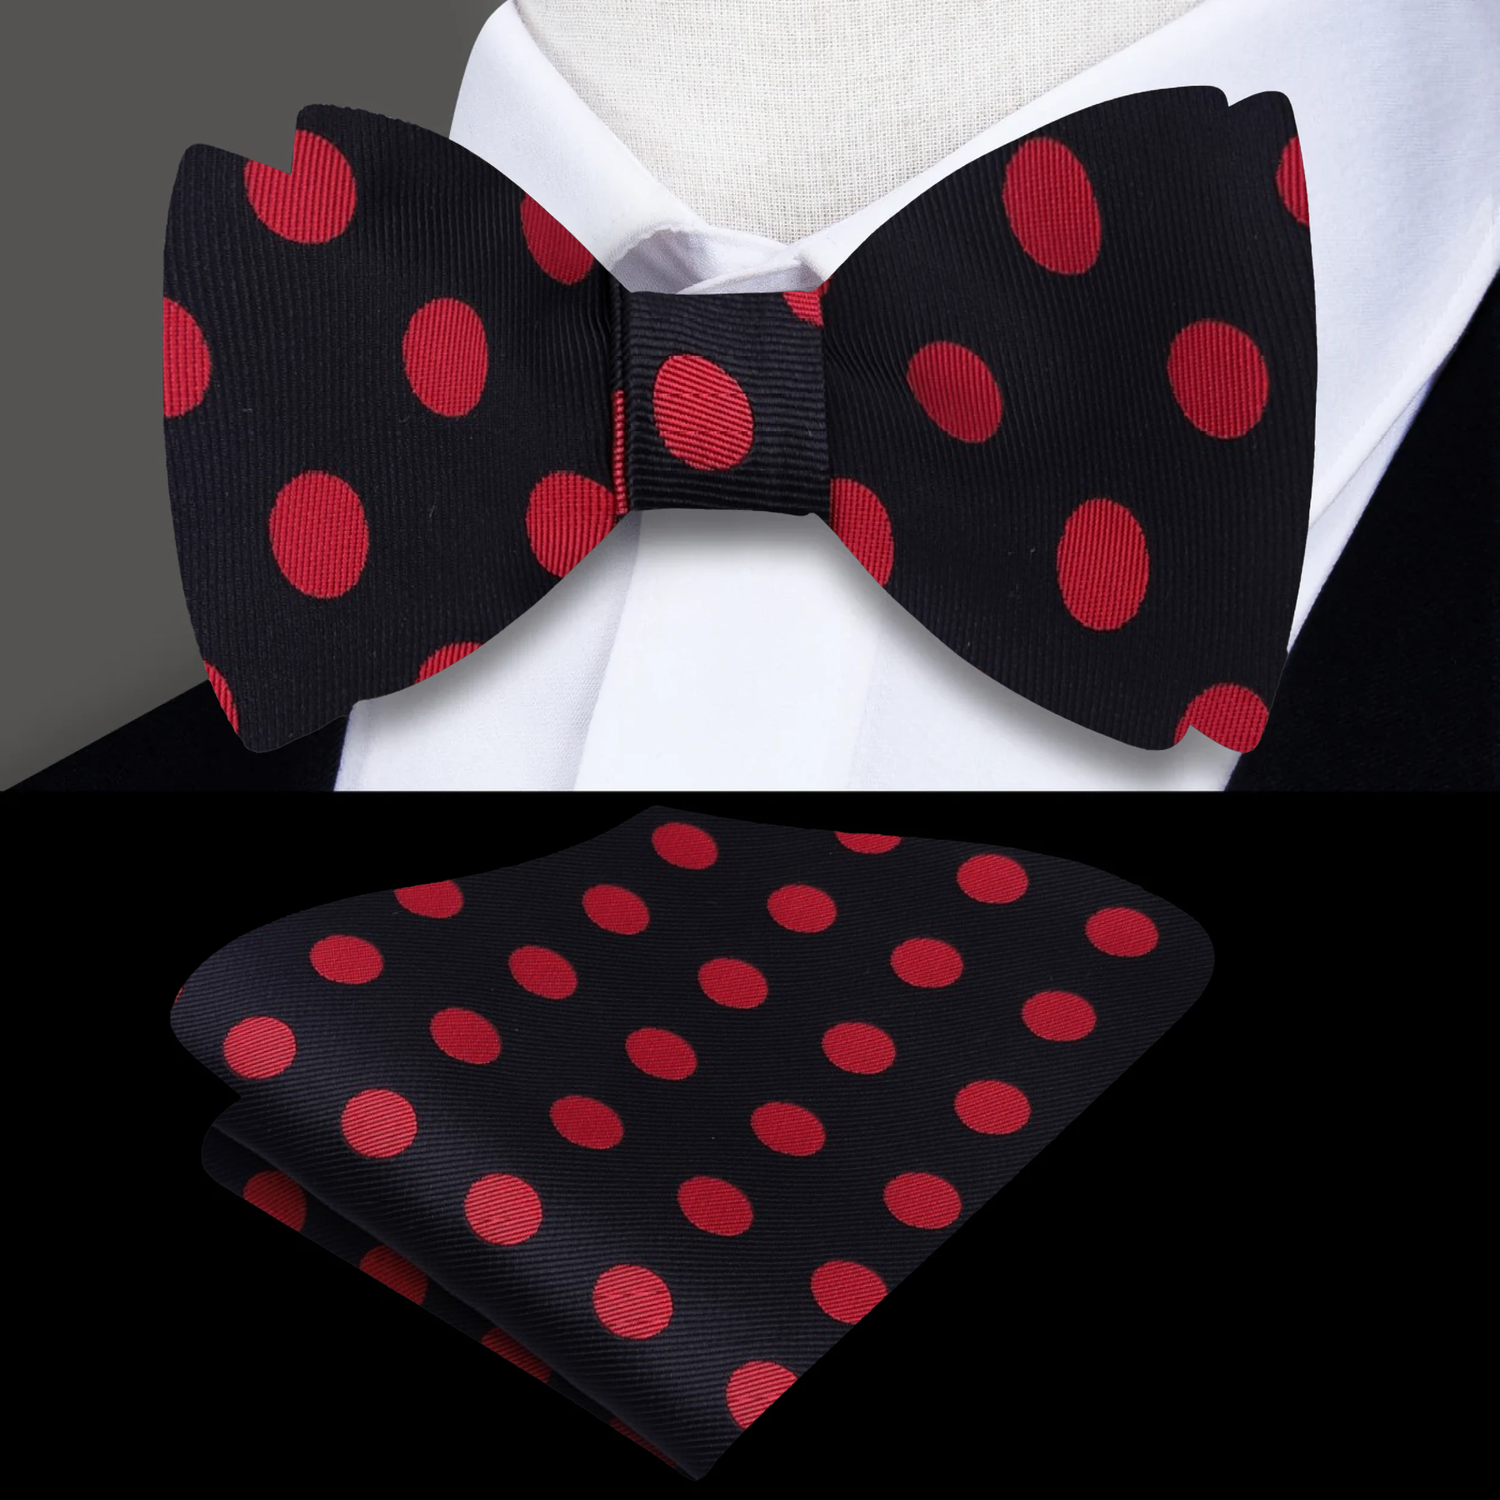 A Black, Red Polka Pattern Silk Self Tie Bow Tie Bow Tie, Matching Pocket Square